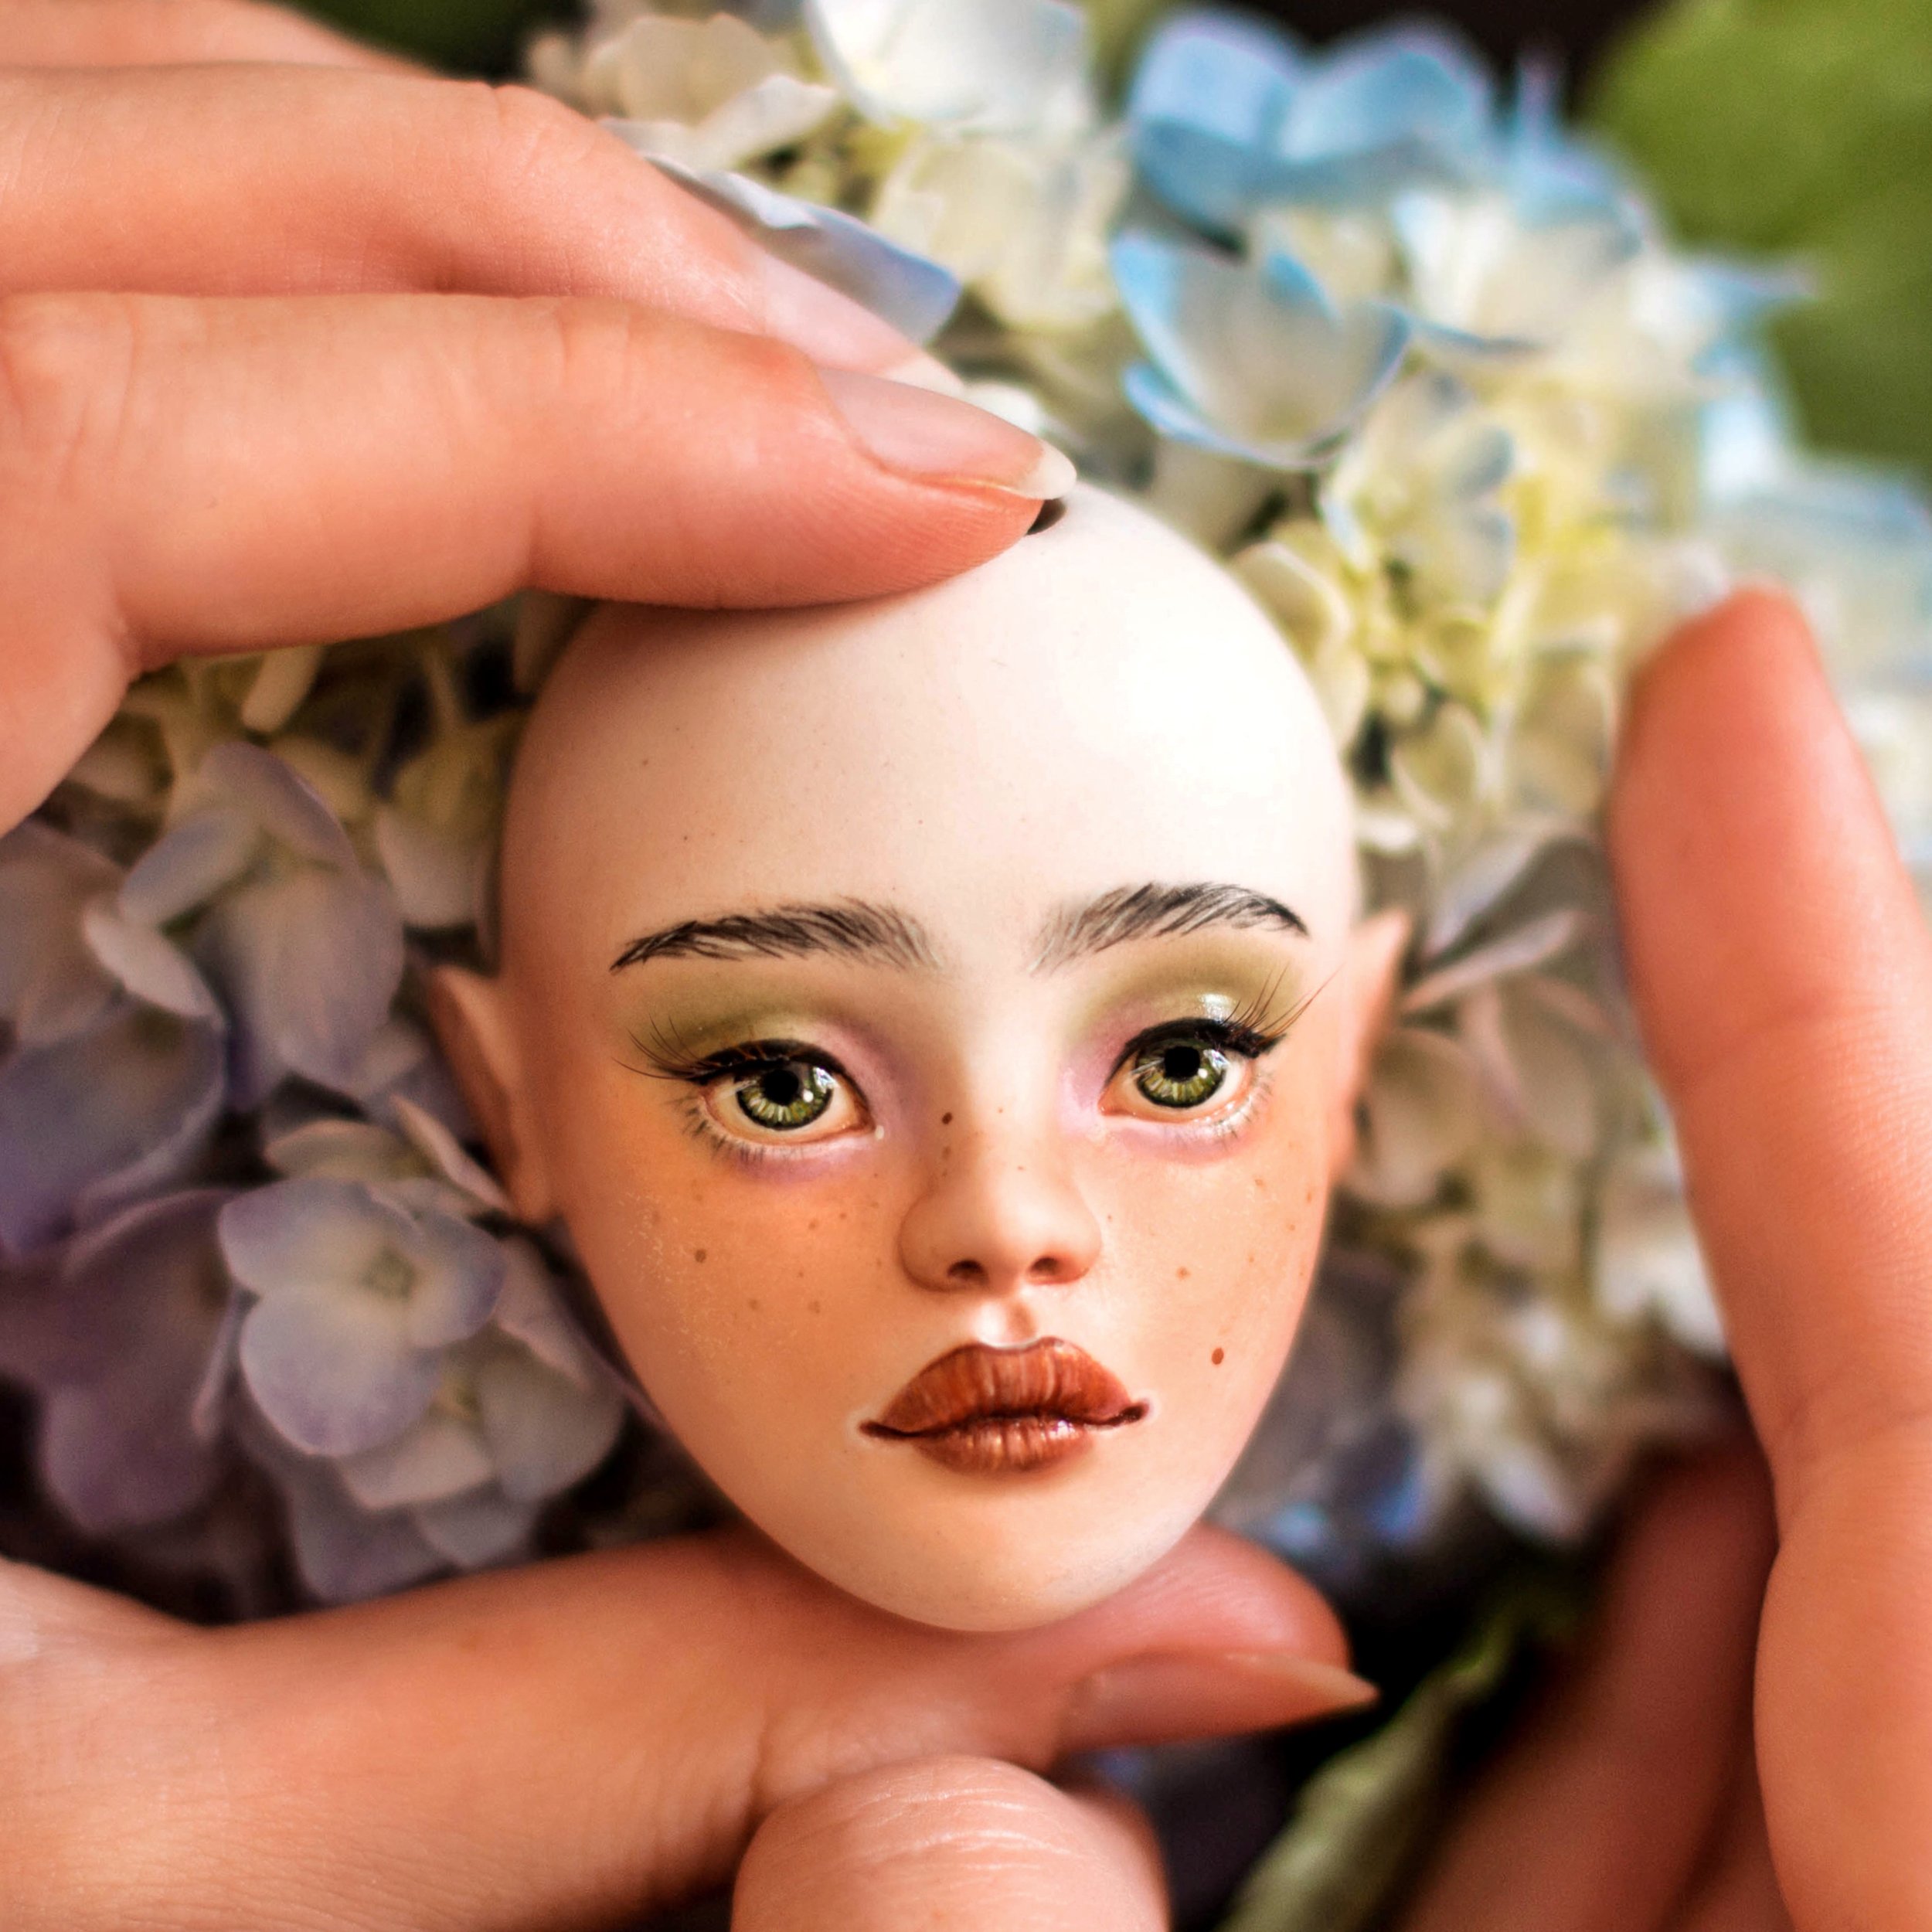 Painting Doll Faces Tips And Tricks